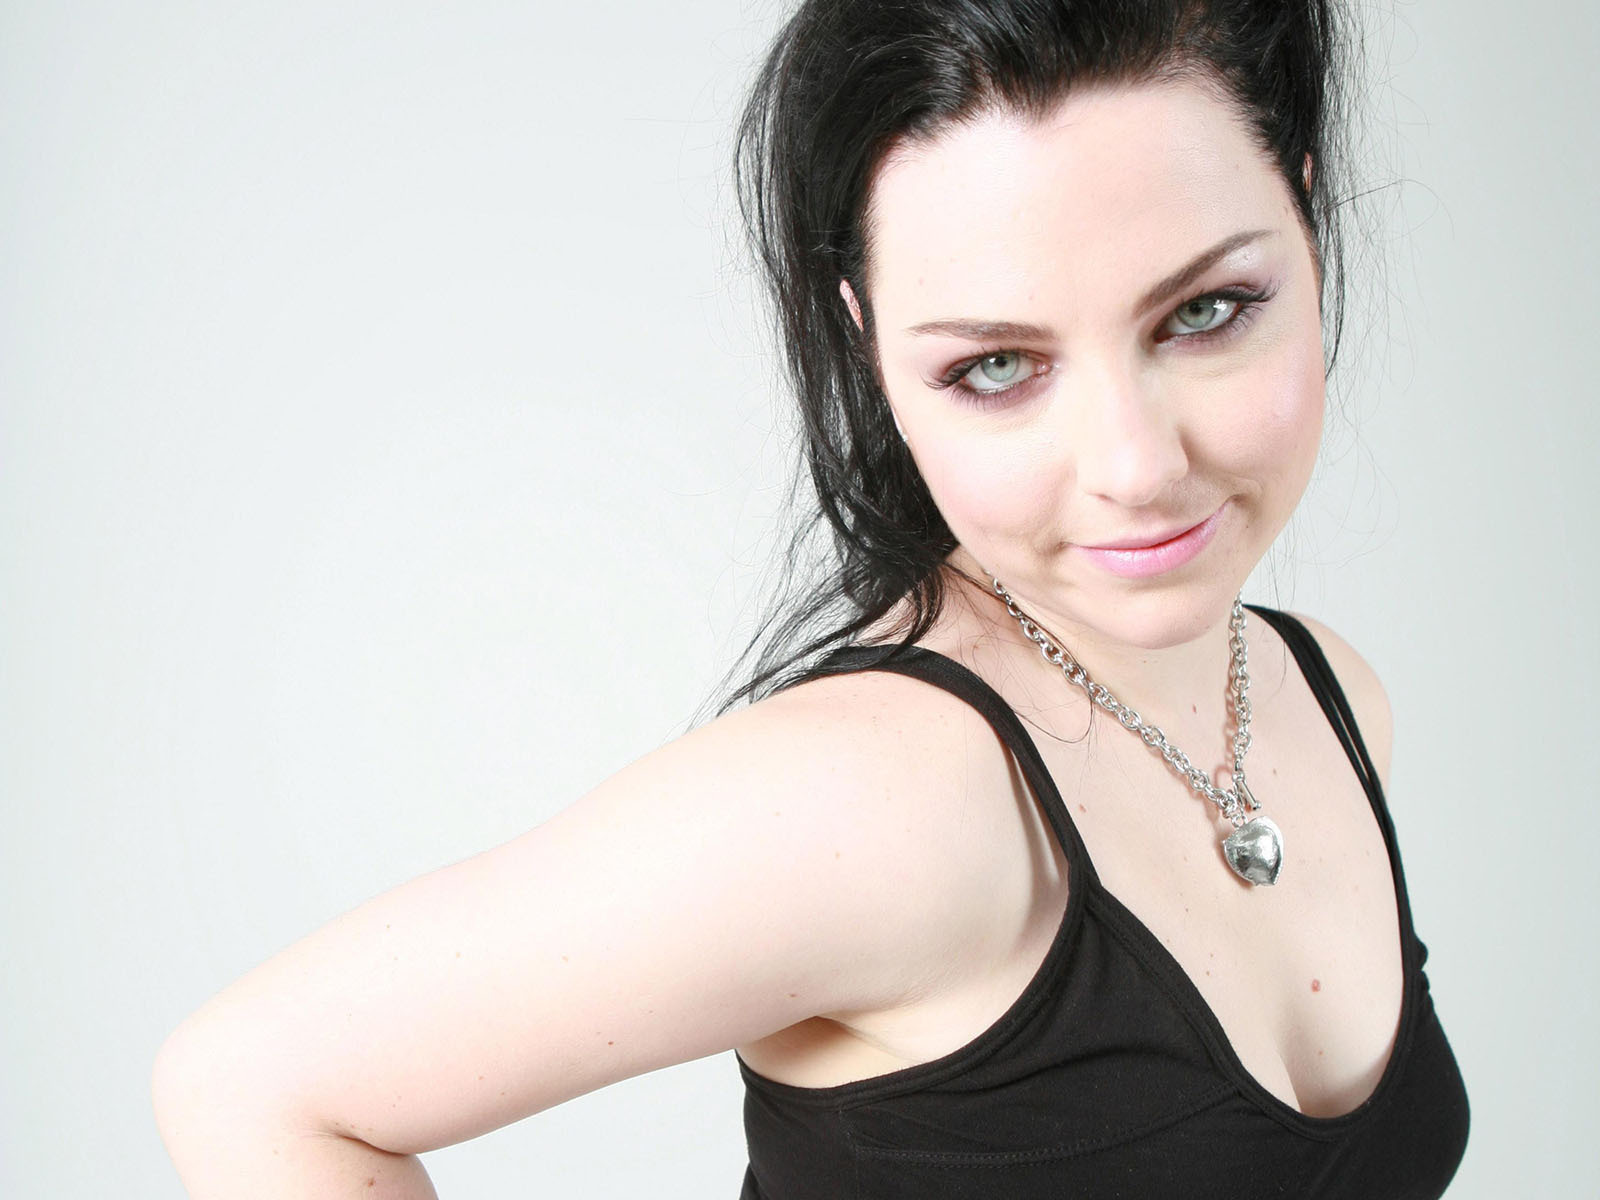 Evanescence Image Amy Lee HD Wallpaper And Background Photos